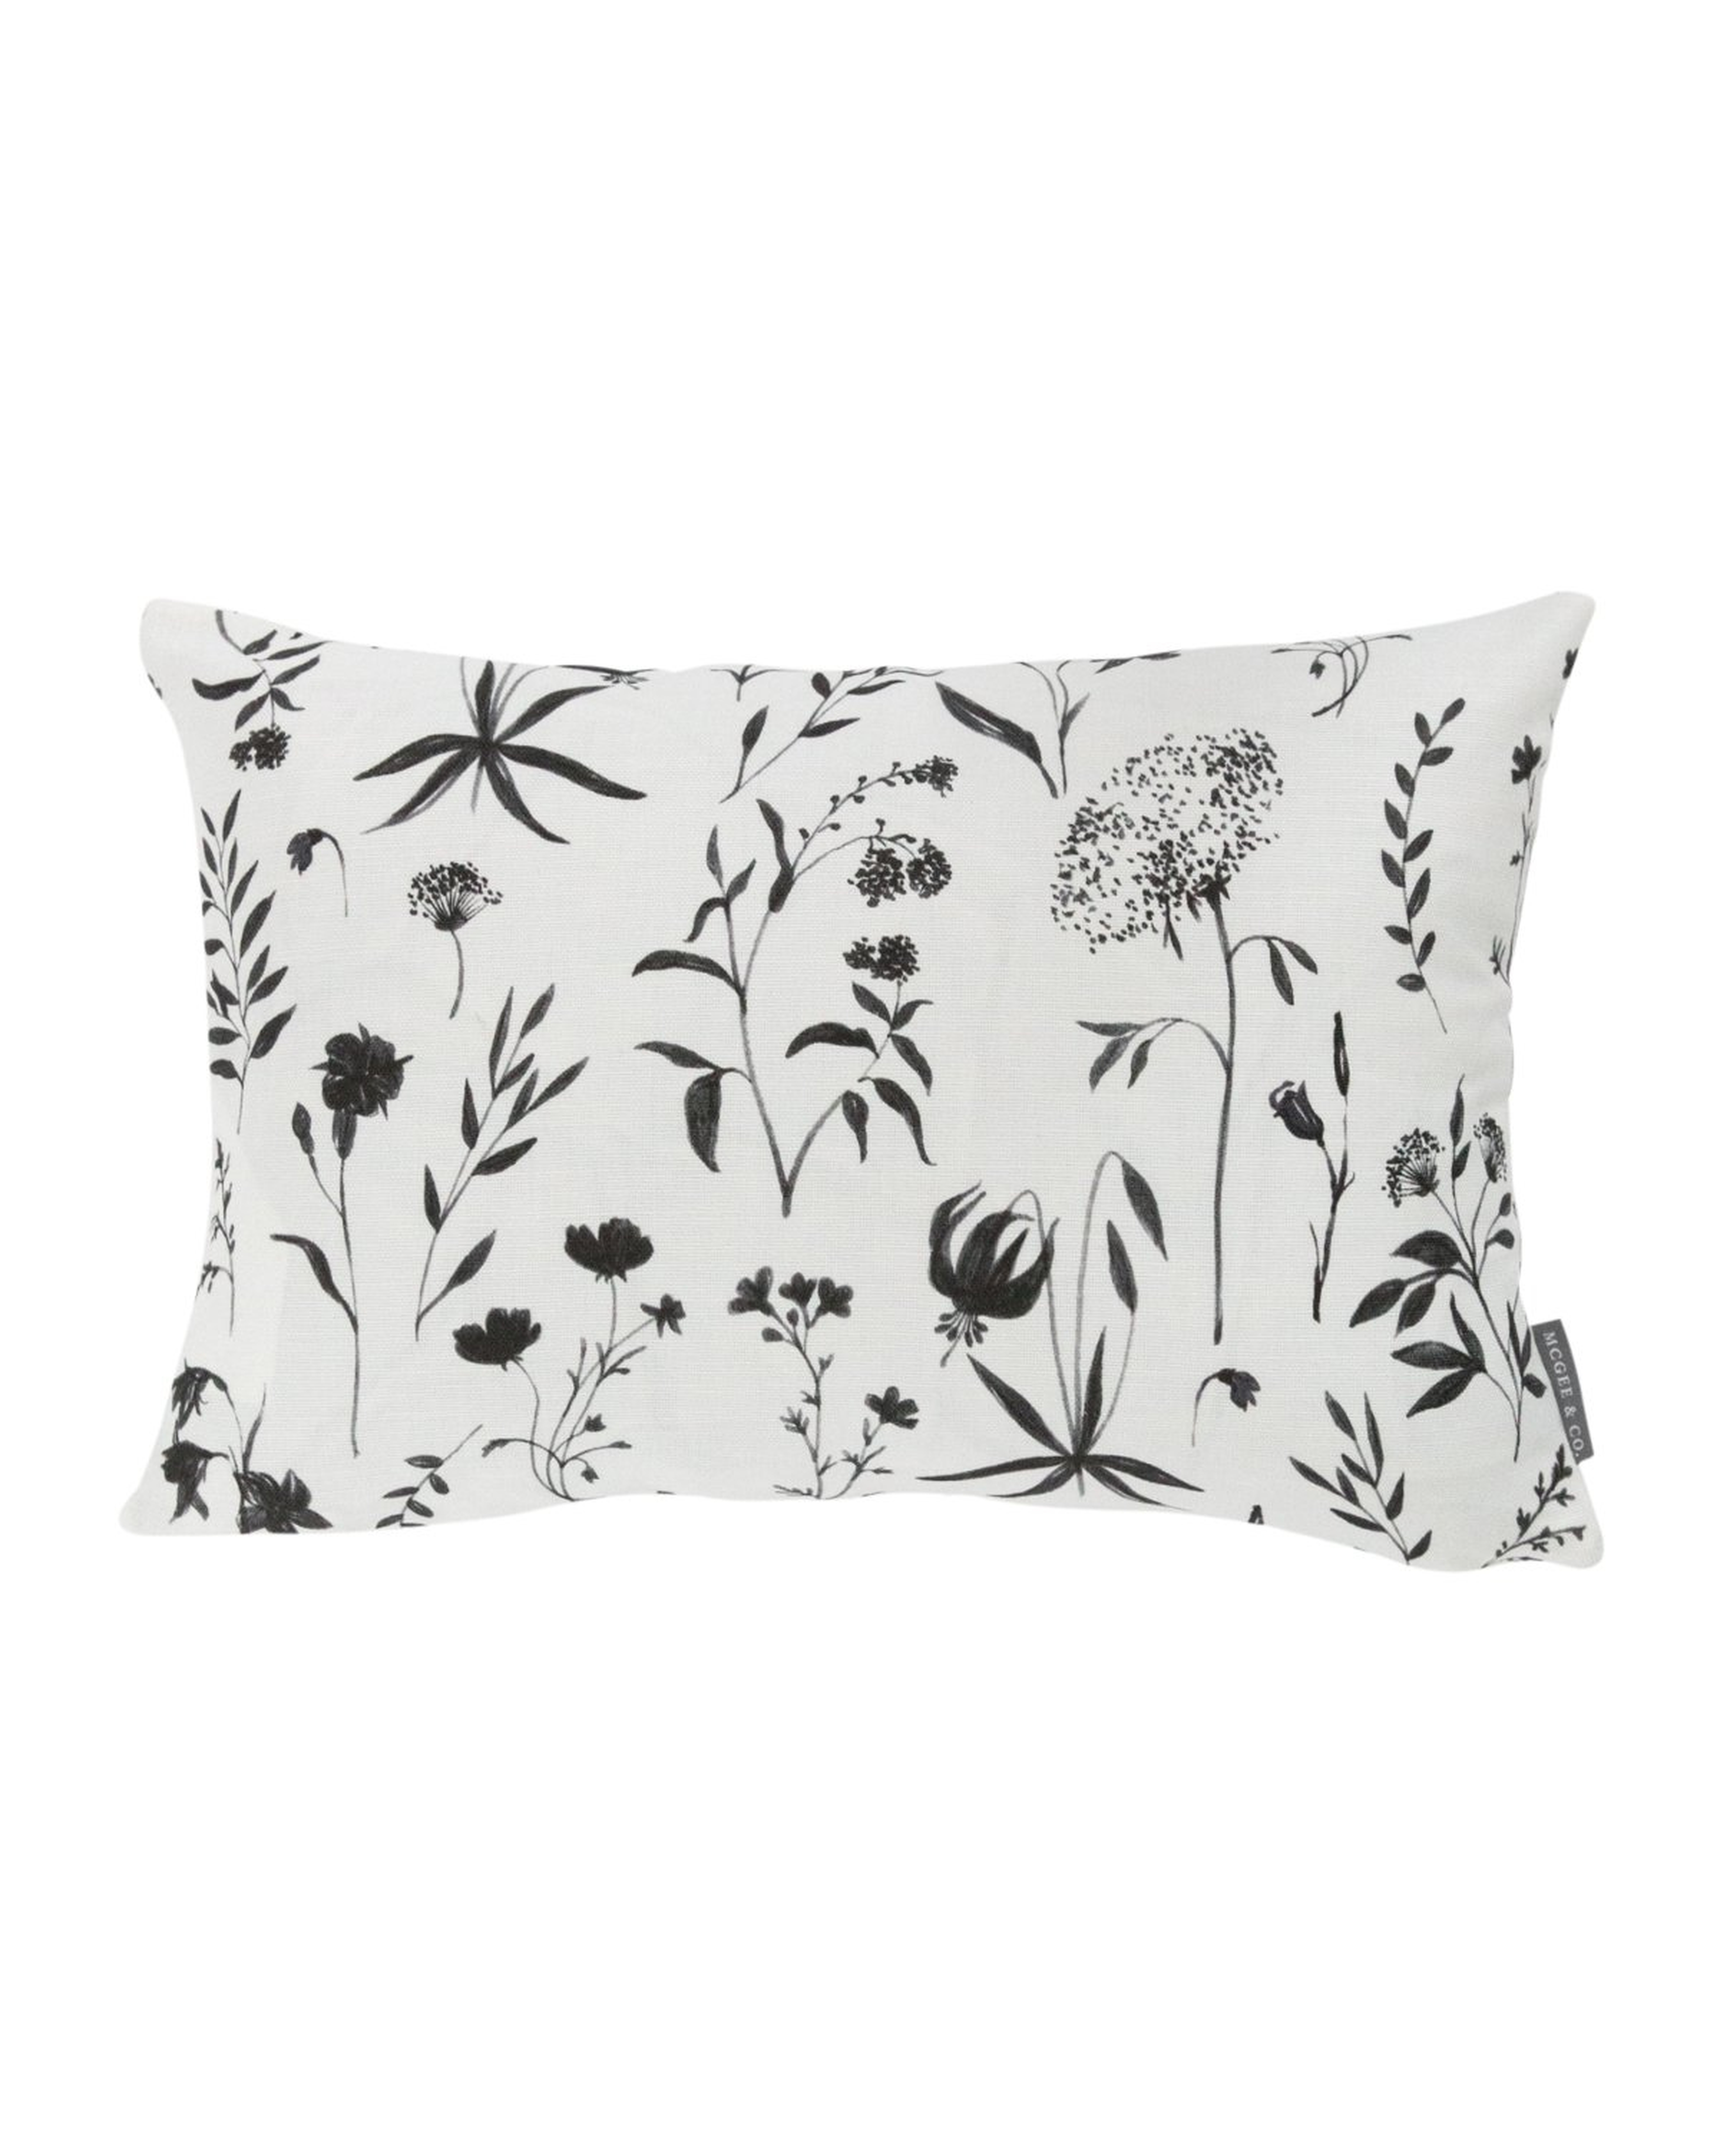 JUNO FLORAL PILLOW WITHOUT INSERT, WHITE, 14" x 20" - McGee & Co.